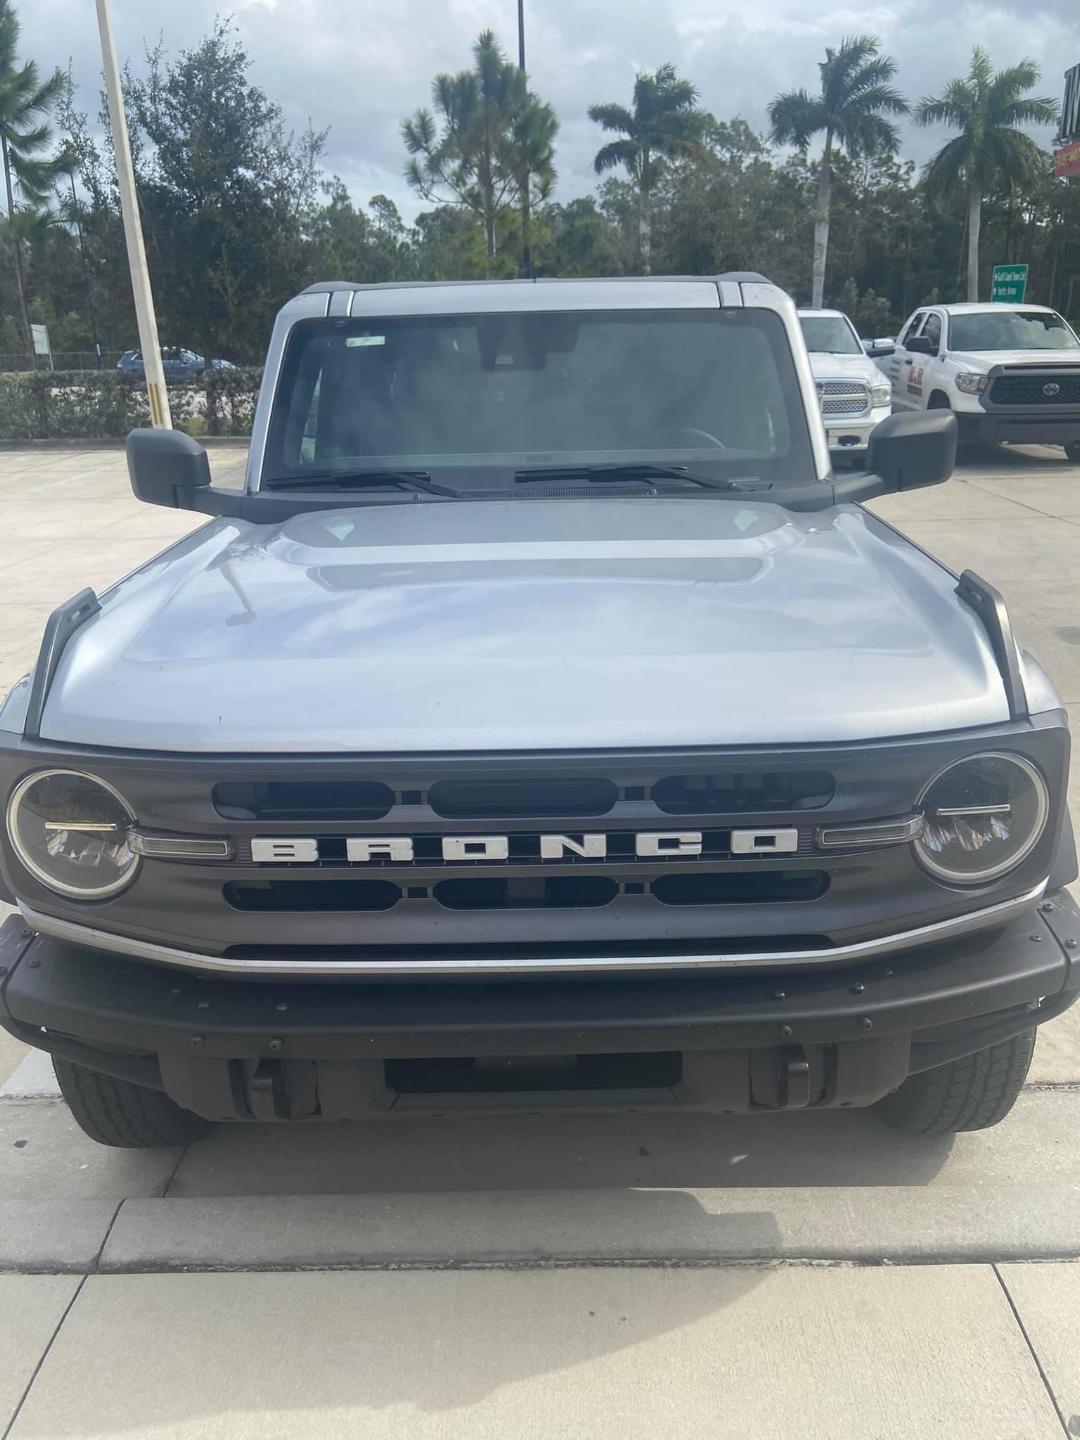 Ford Bronco 4 door Big Bend non SAS spotted in Fort Myers FL IMG_20210108_122807